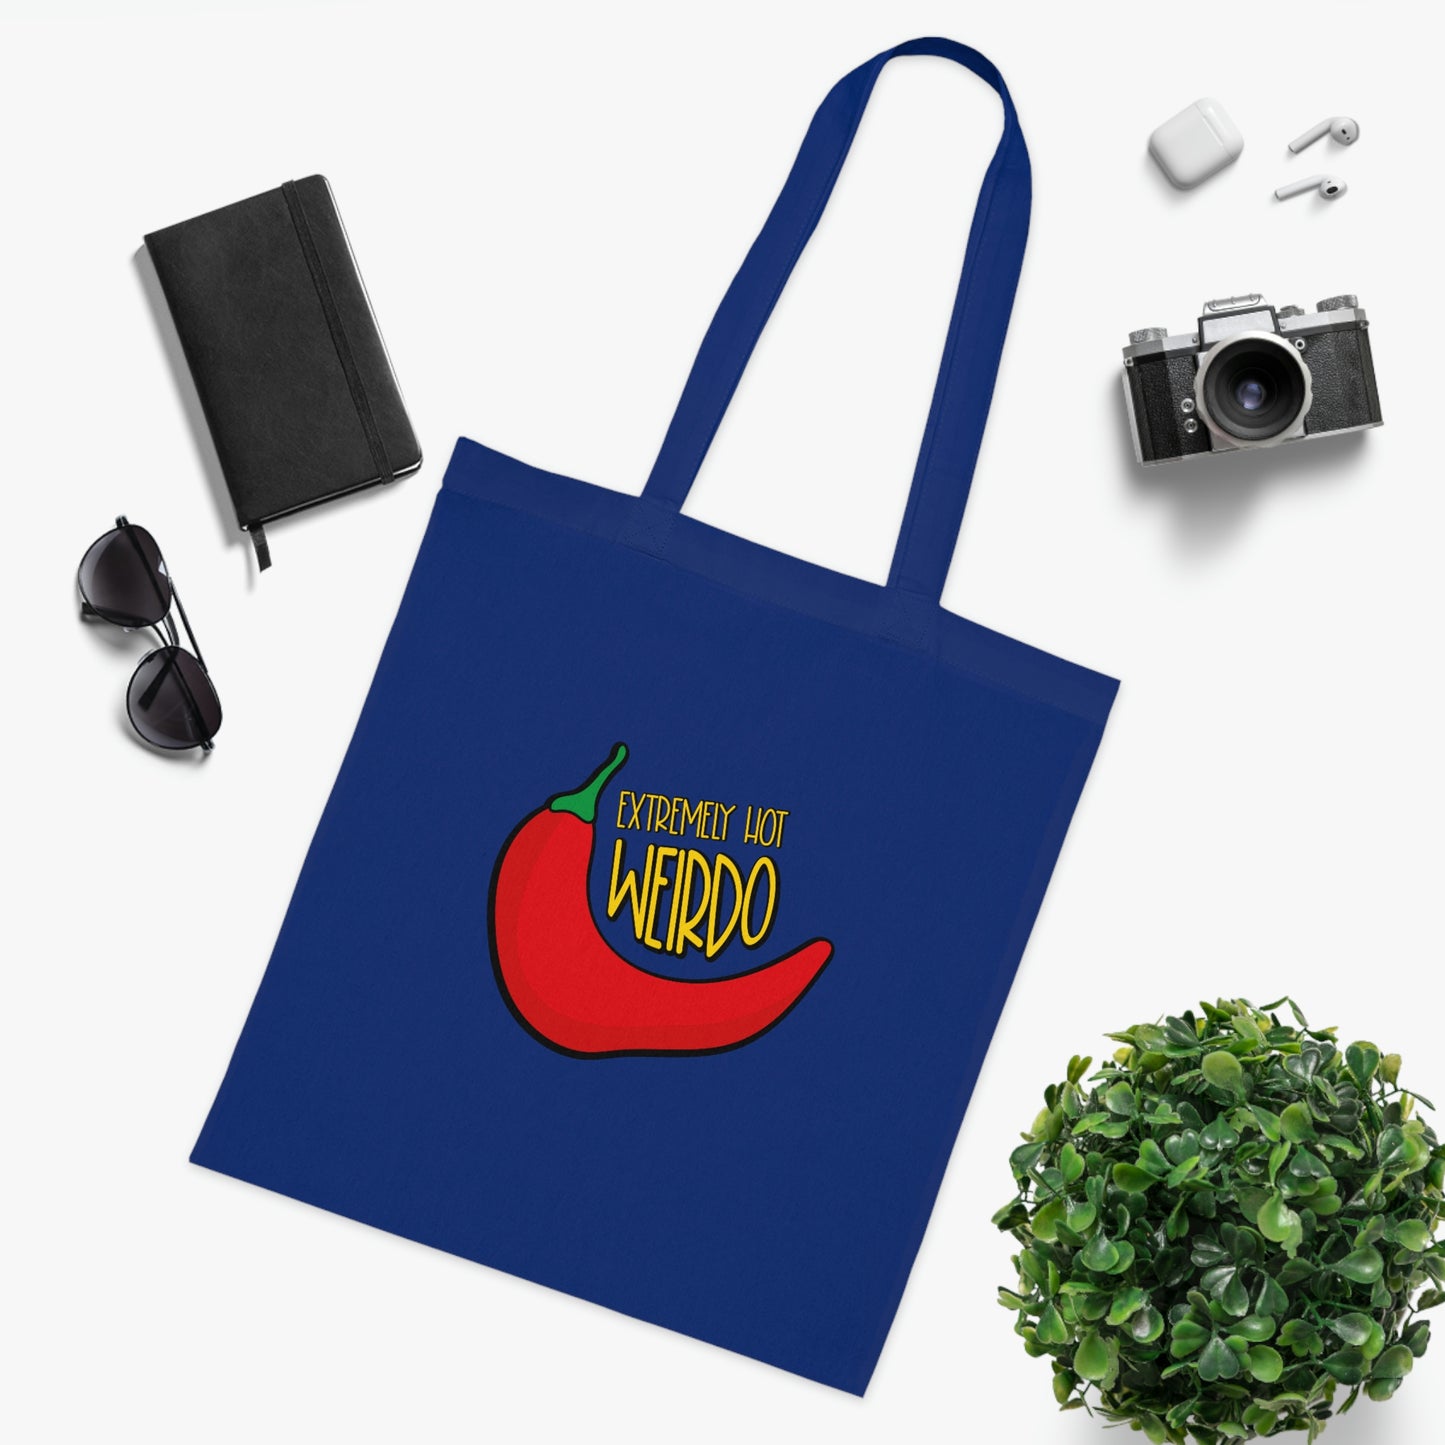 Weirdo | Sarcastic meme tote bag. Extremely Hot Weirdo. Are you weird and hot? Then this cotton tote bag for you daily shopping is perfect for you! Check out more tote bags with funny memes in our online gift store for weird people.